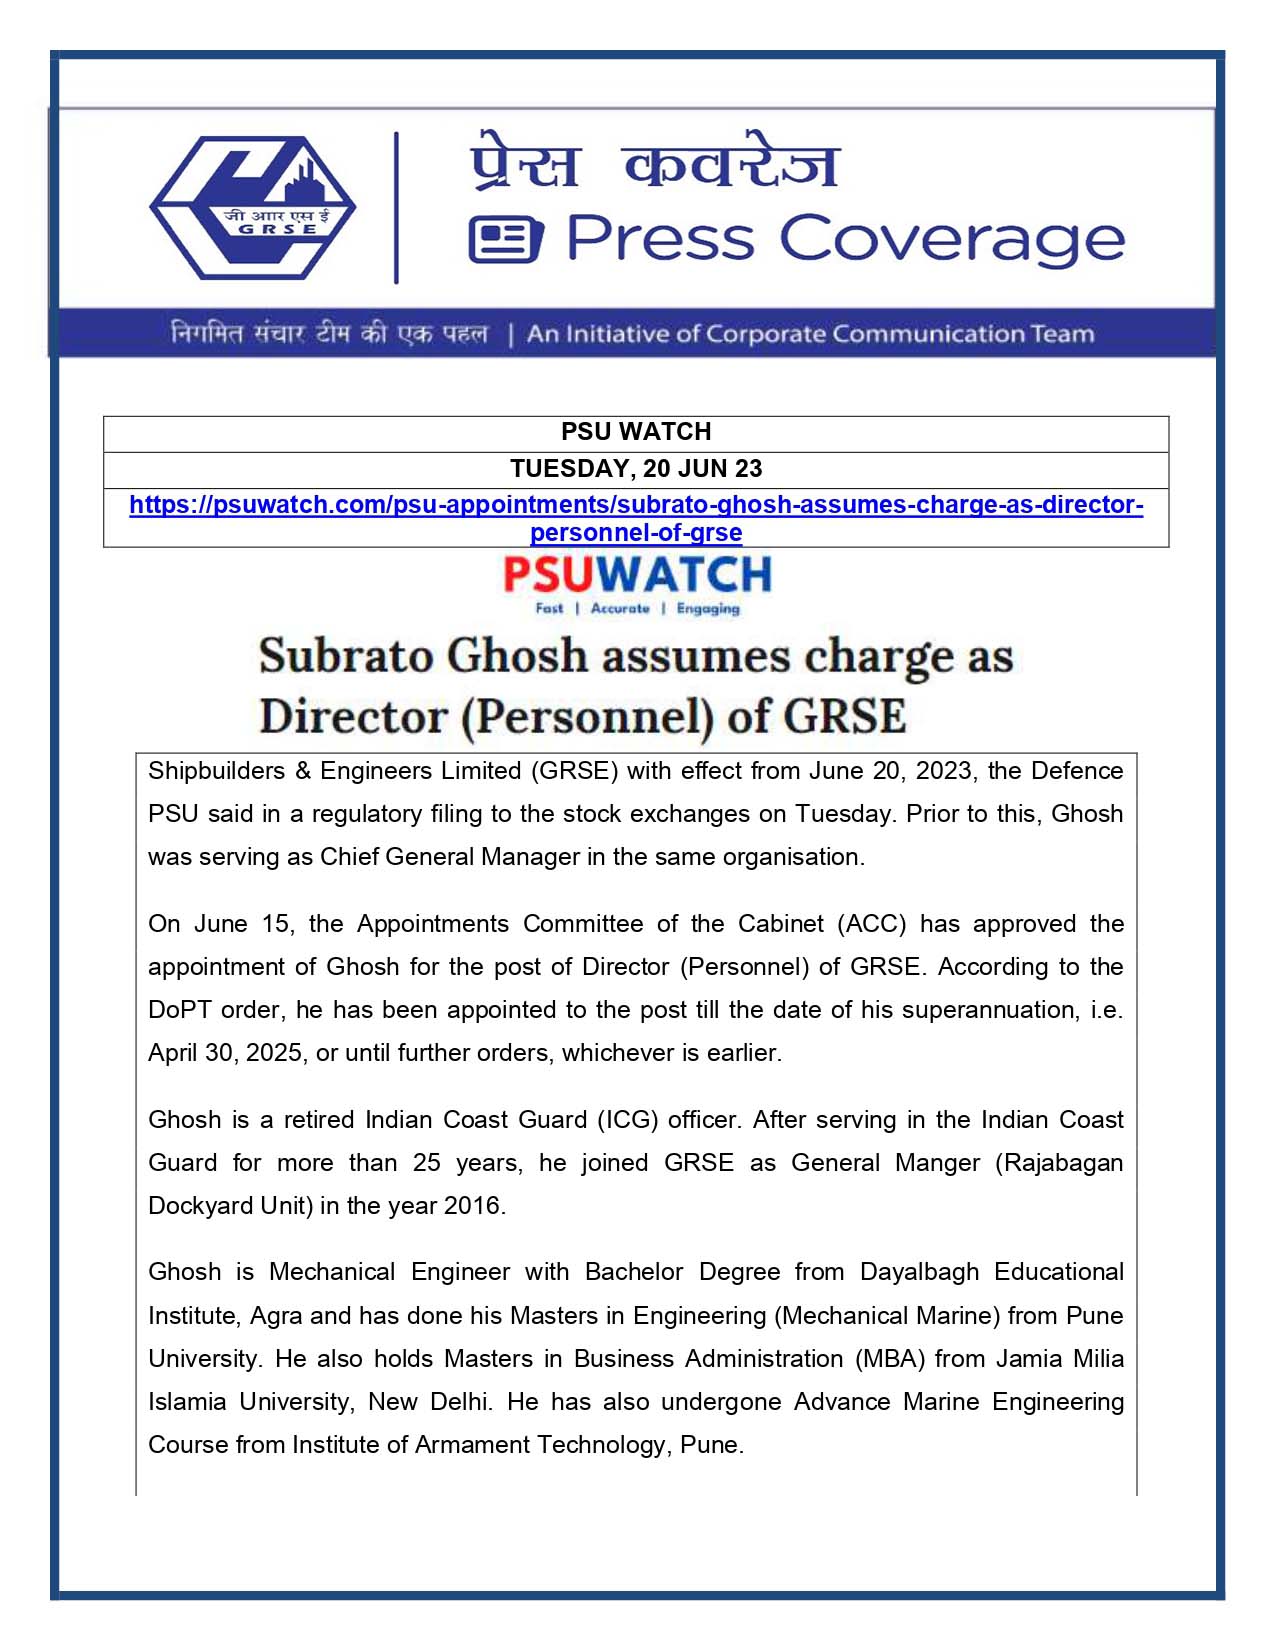 Subrato Ghosh assumes charge as Director (Personnel) of GRSE